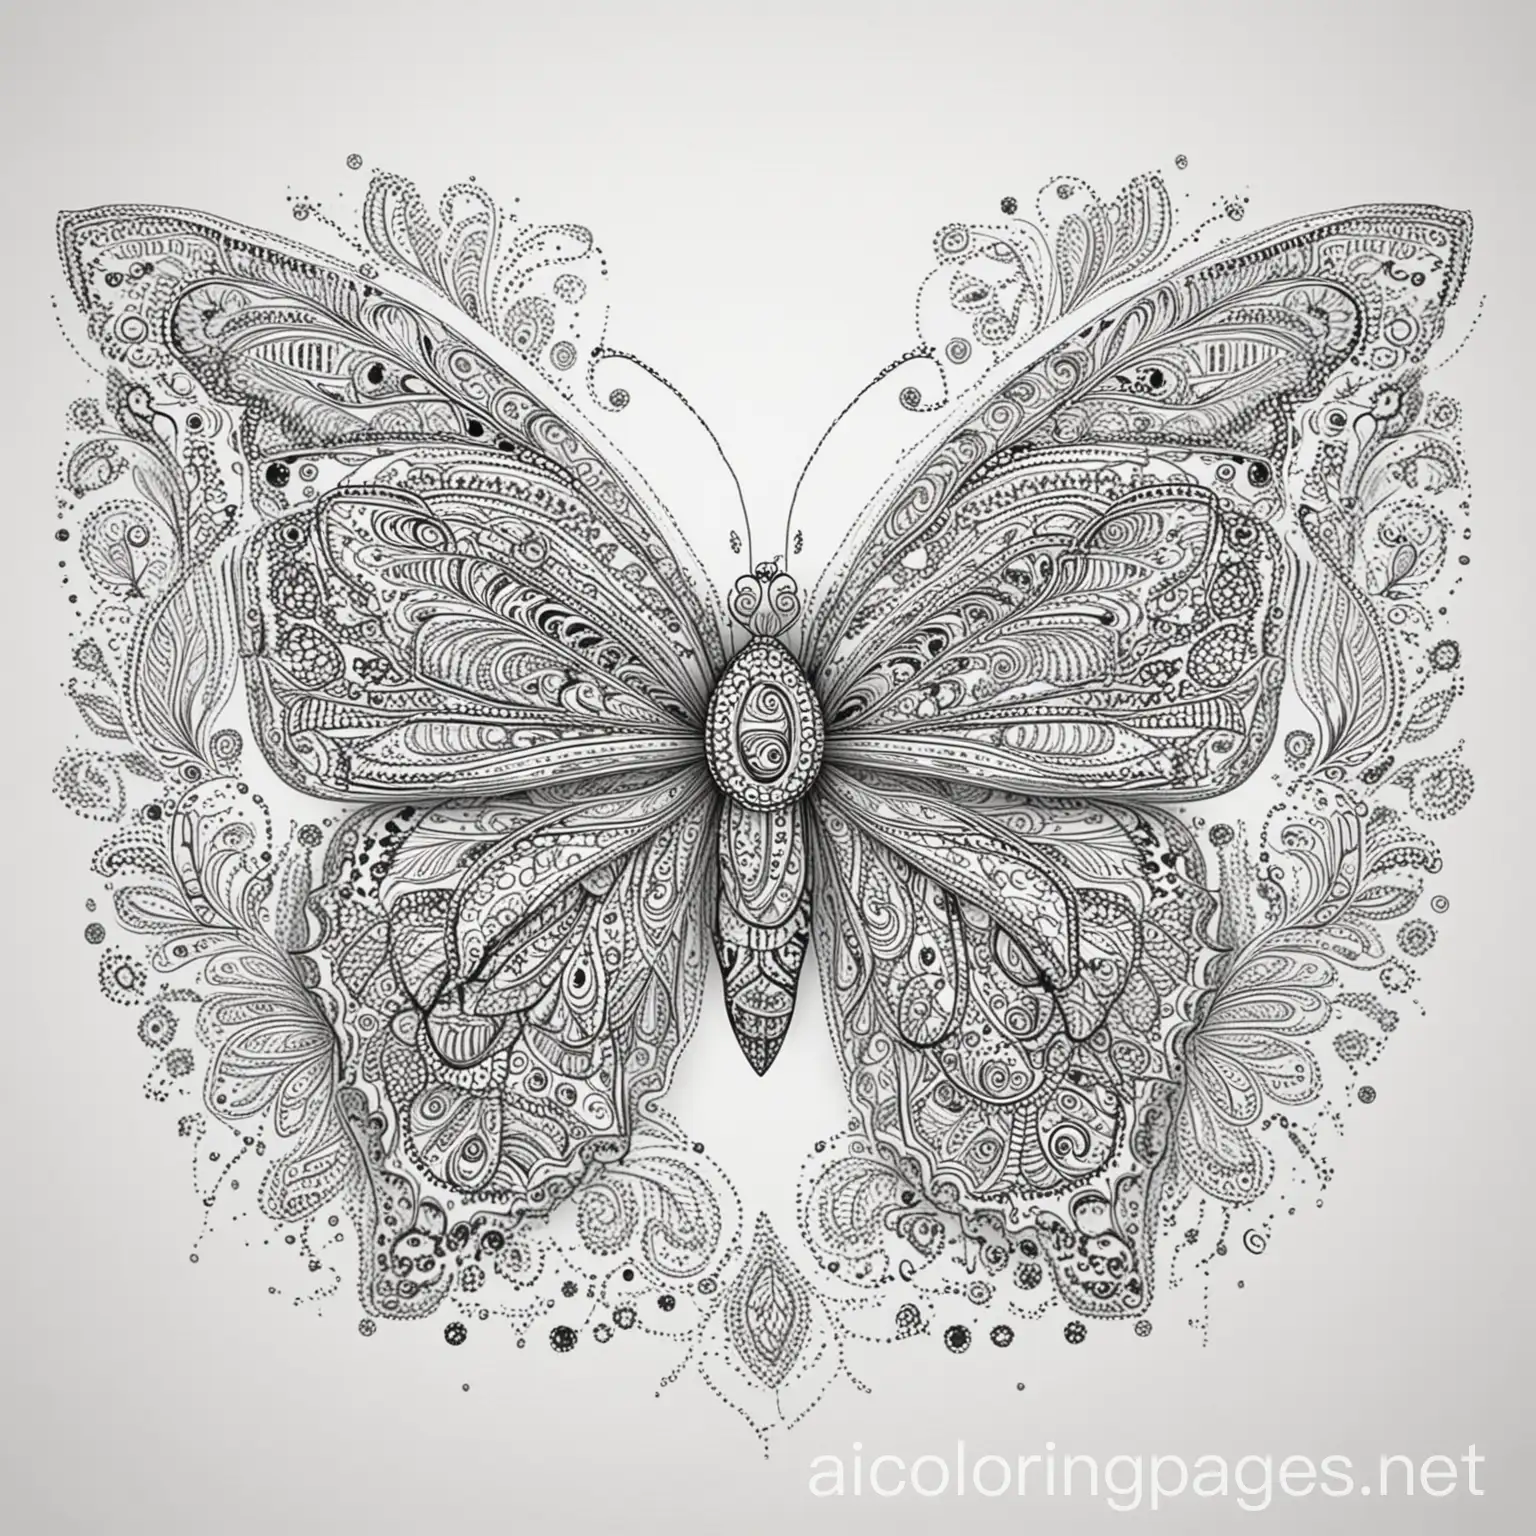 butterfly combined with paisley, Coloring Page, black and white, line art, white background, Simplicity, Ample White Space. The background of the coloring page is plain white to make it easy for young children to color within the lines. The outlines of all the subjects are easy to distinguish, making it simple for kids to color without too much difficulty